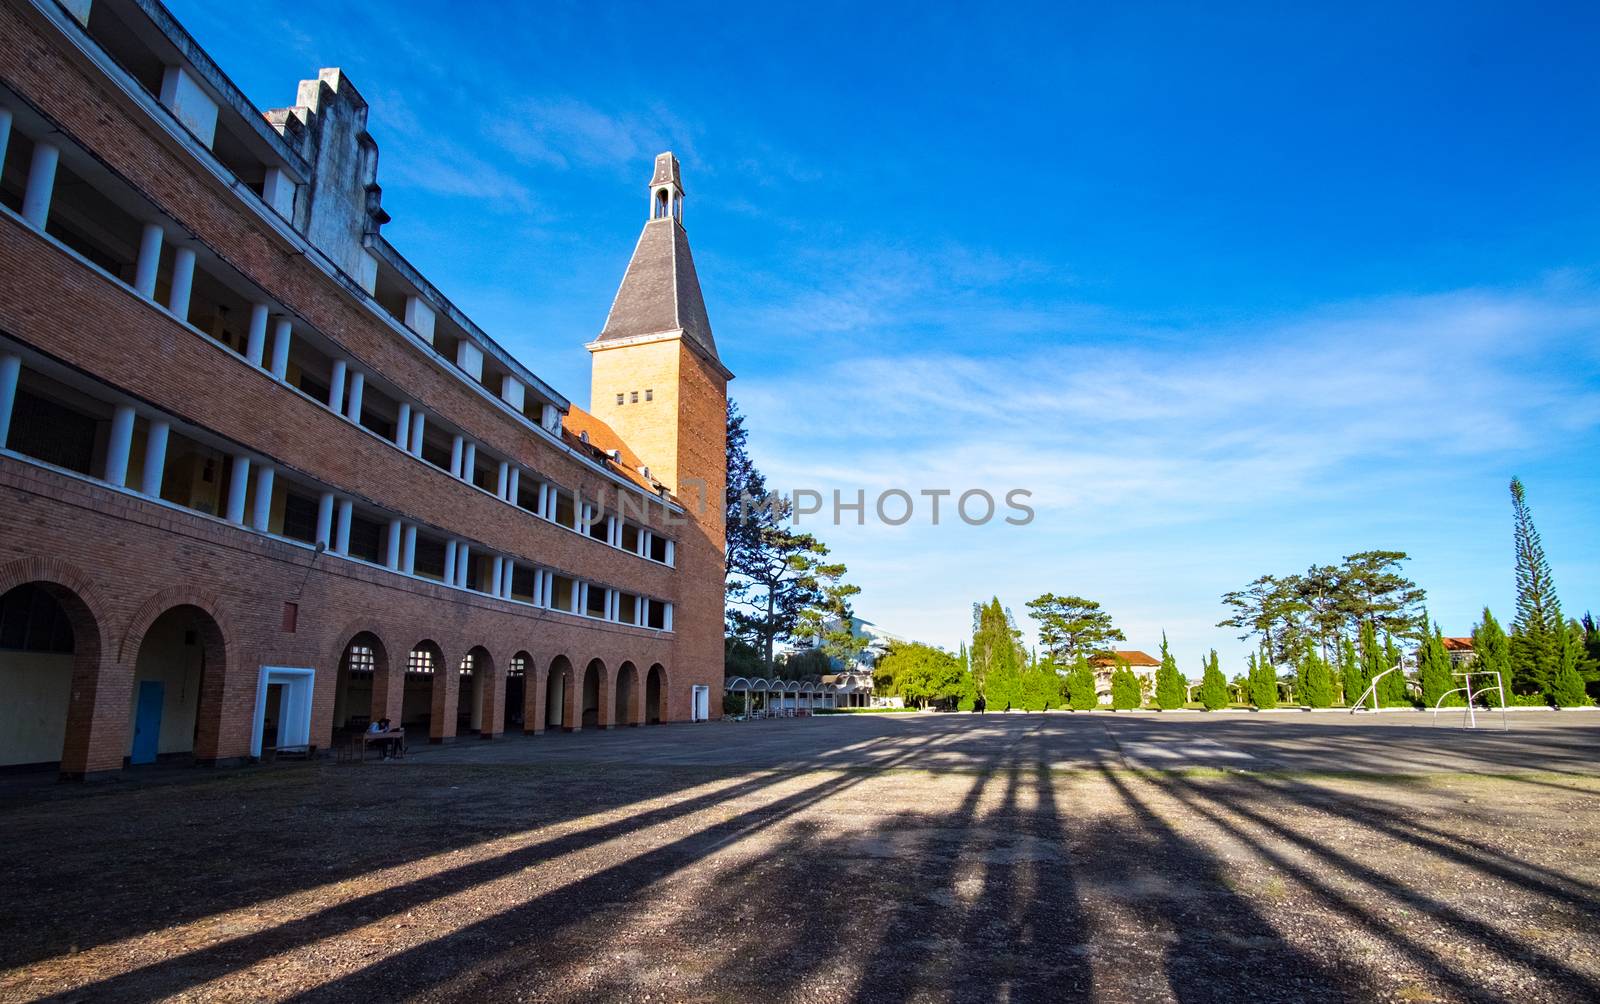 Arched architectural beauty, rustic buildings Pedagogical University in sunny with red roofing tiles impressive pines in Da Lat city, Lam Dong, Vietnam